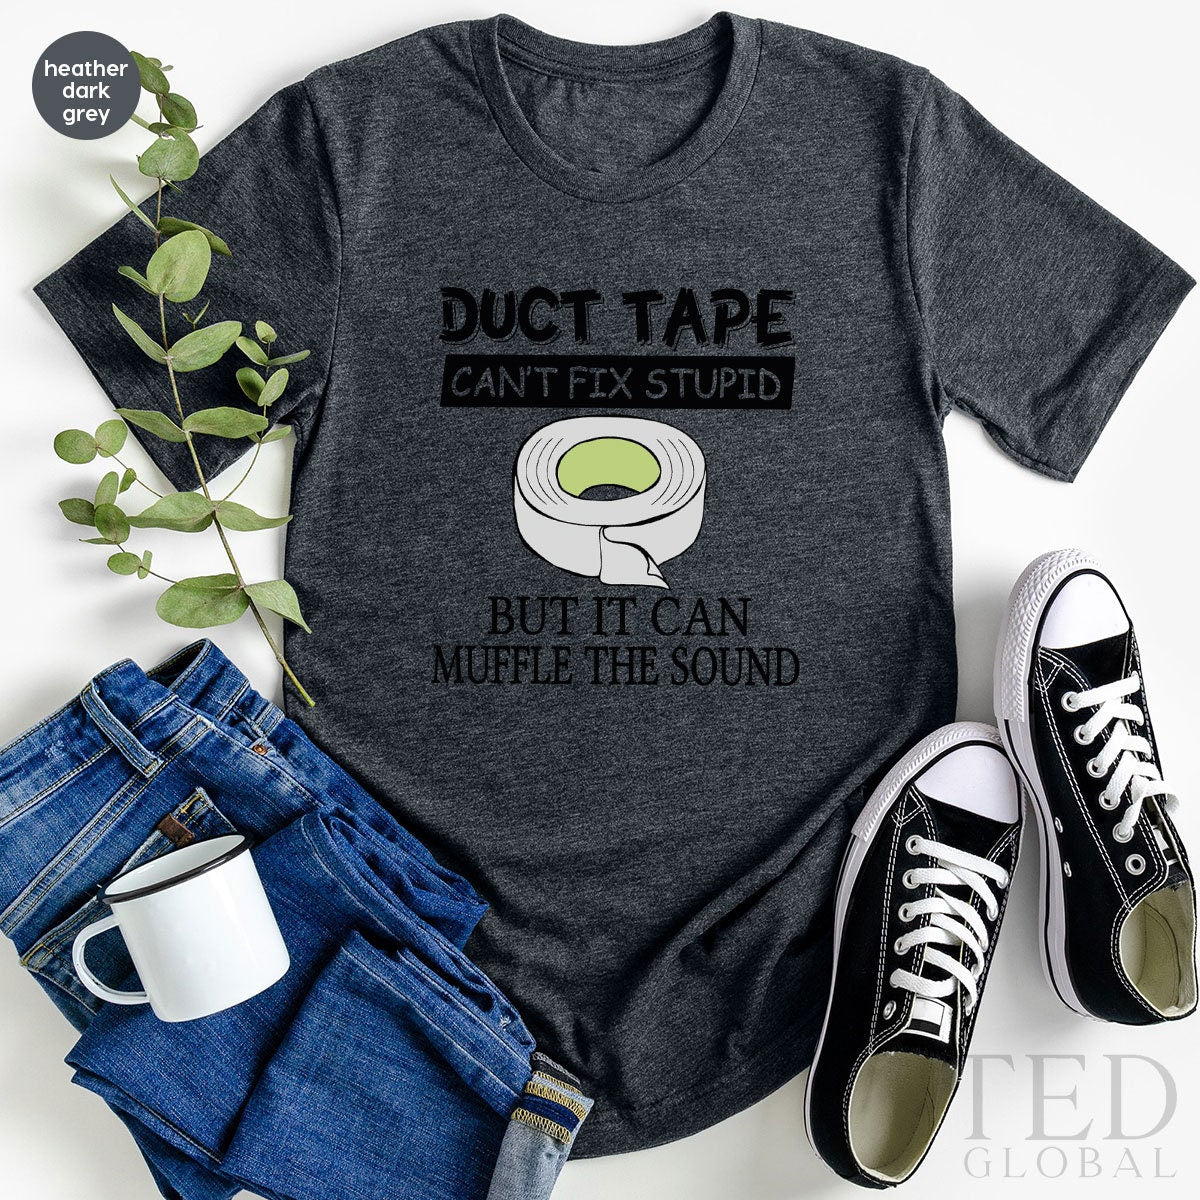 Funny Sarcastic Shirt, Funny Saying T-Shirt, Duct Tape T Shirt, Can't Fix Stupid Shirts, Sarcasm Girl Tee, Humorous T-Shirt, Gift For Her - Fastdeliverytees.com